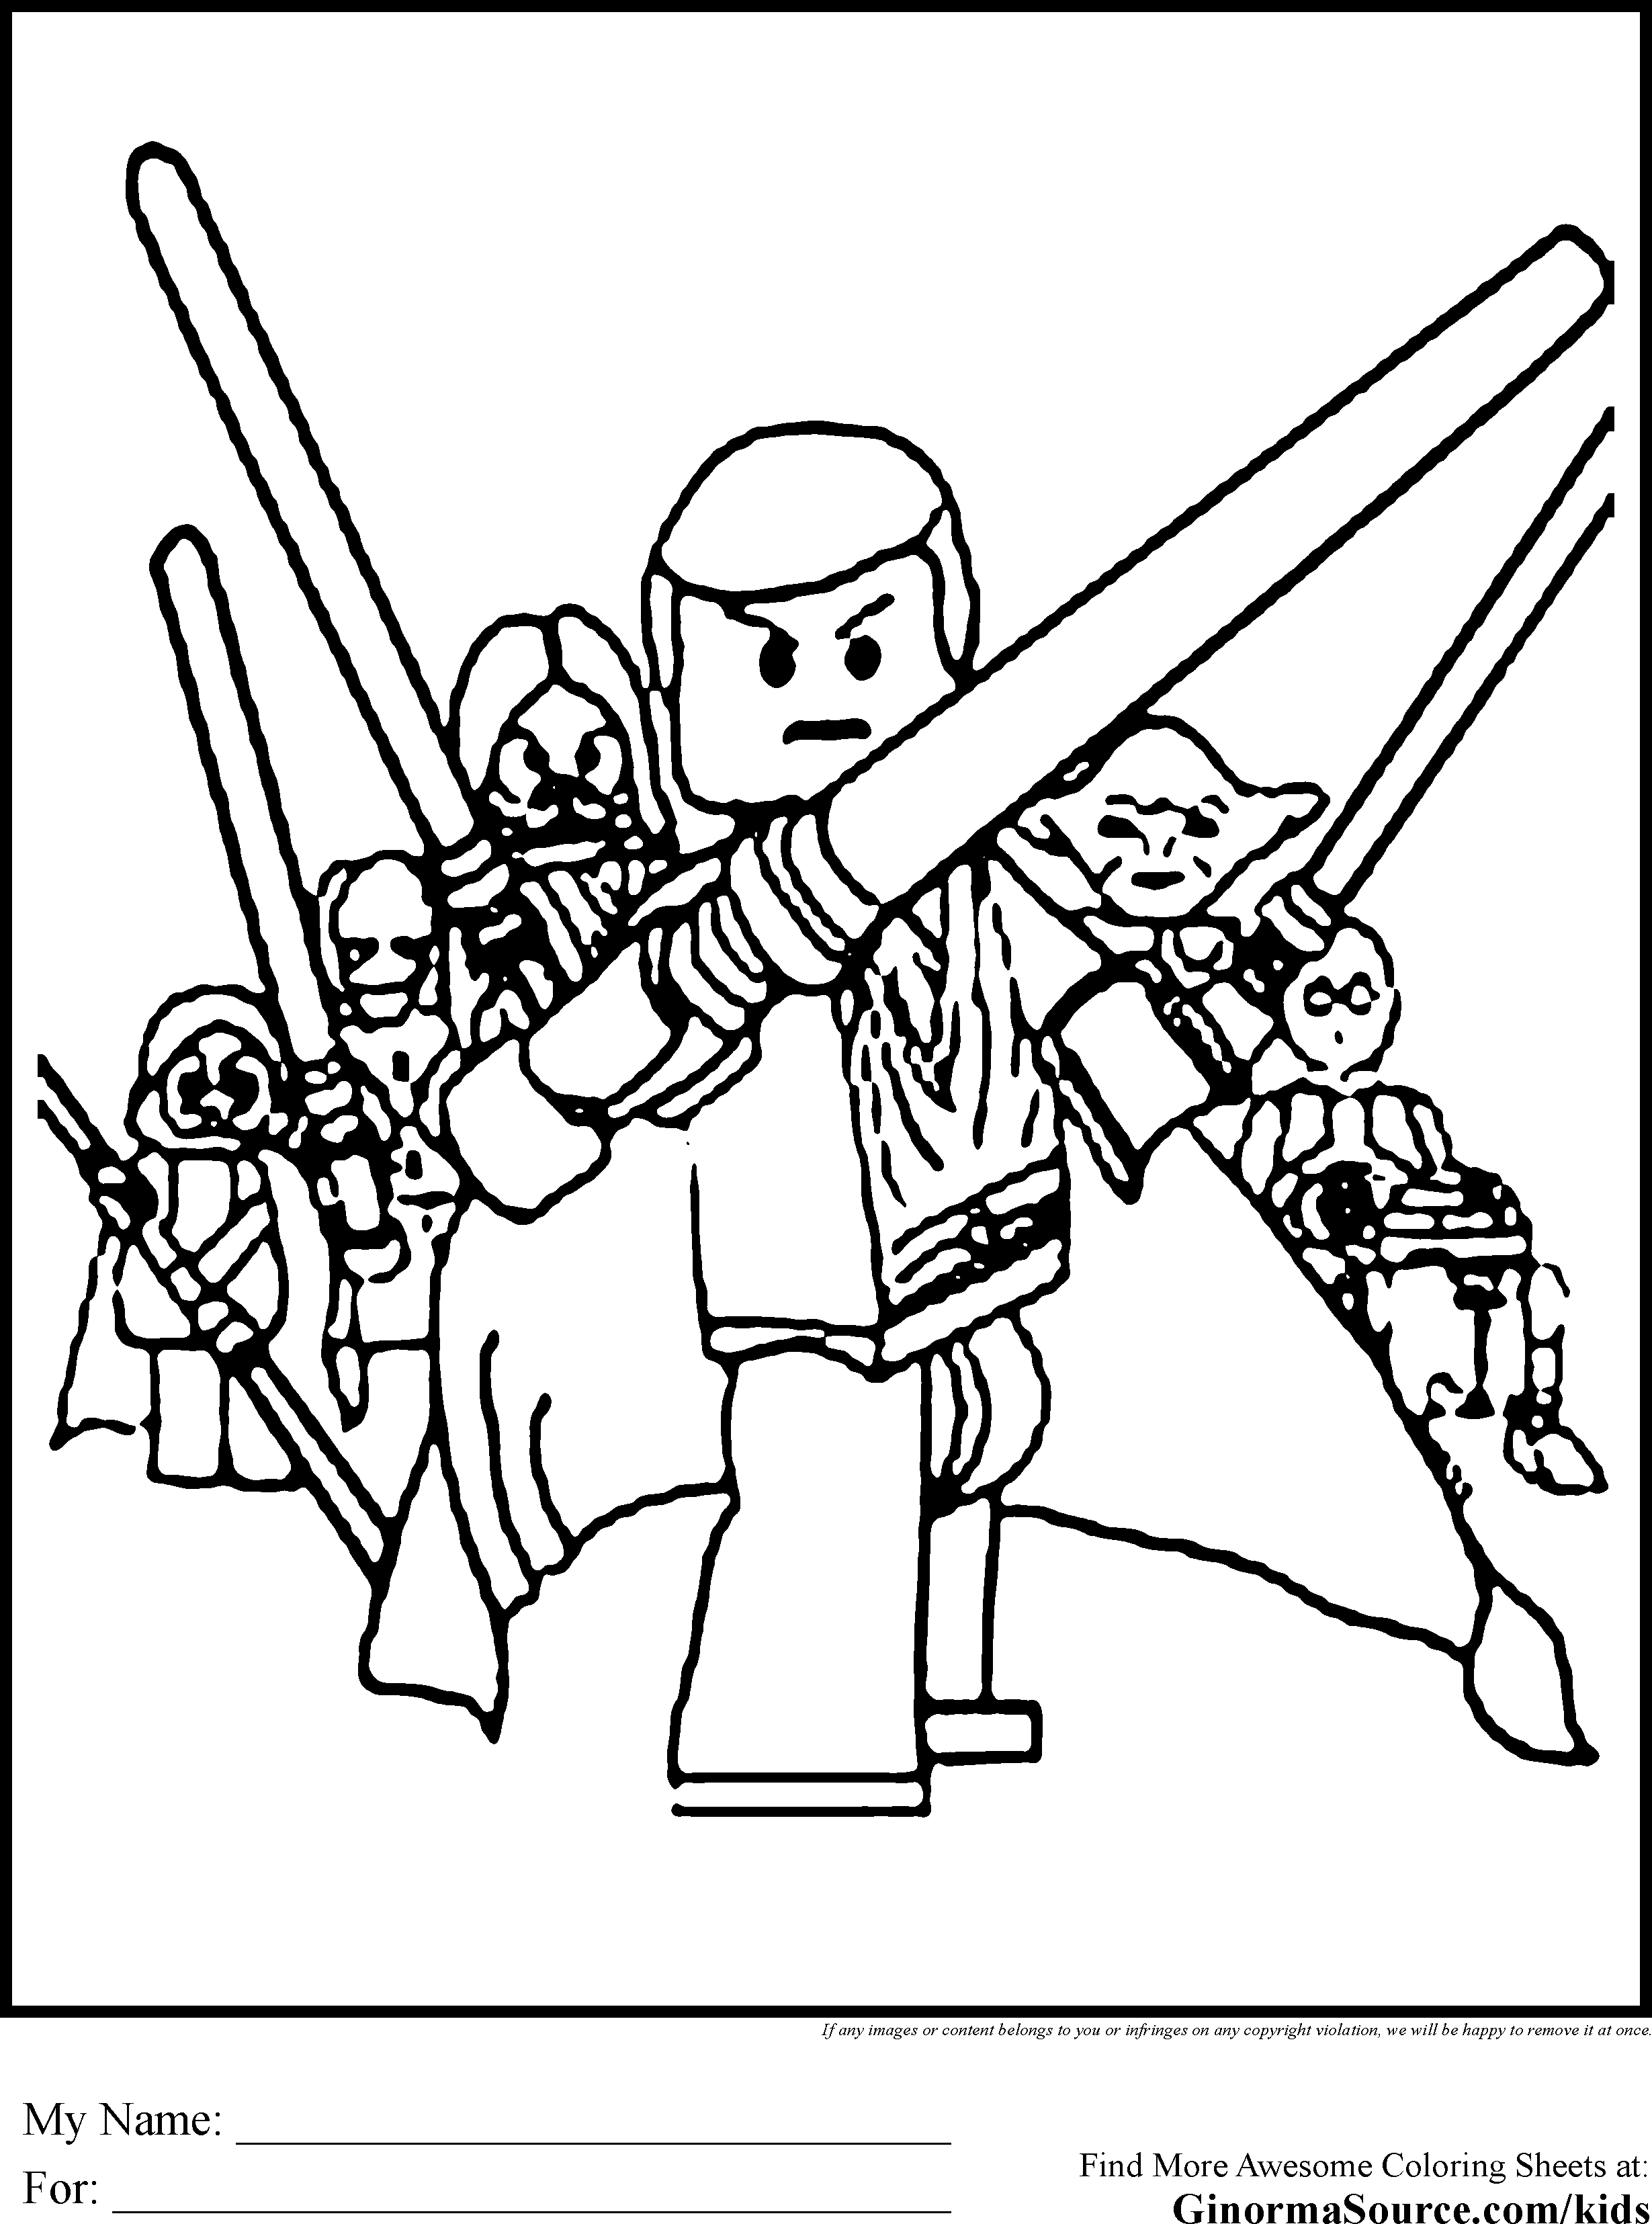 Lego starwars colouring in pages